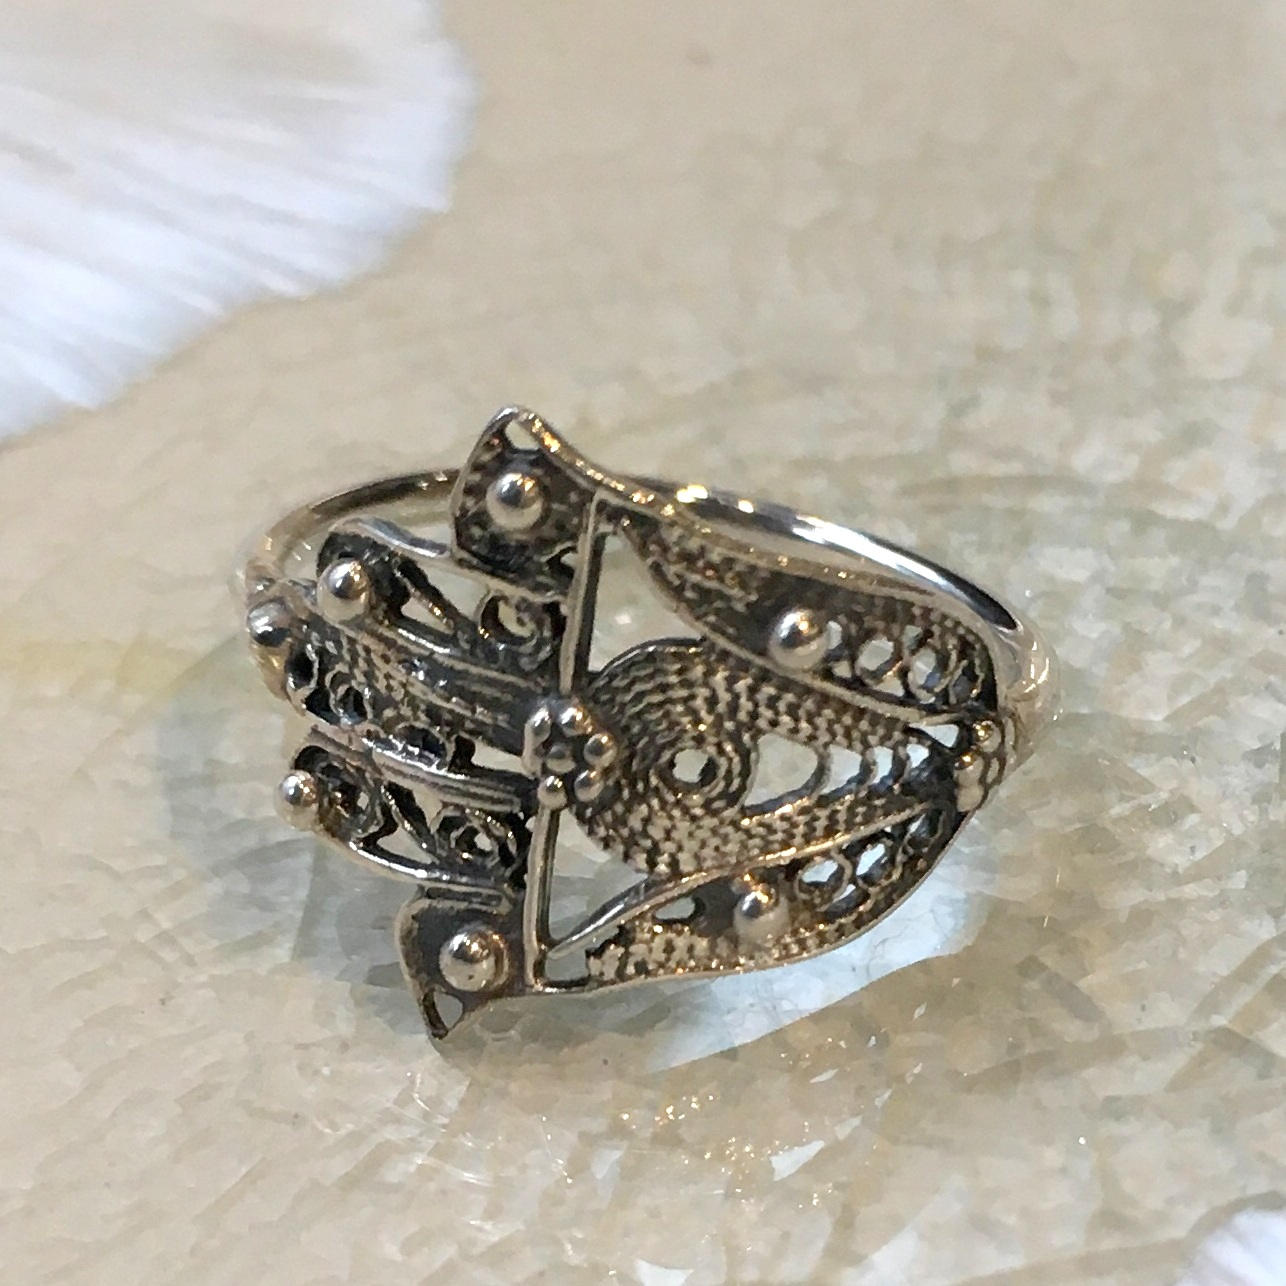 Silver Hamsa ring,  against the evil eye, simple ring, dainty ring, statement ring, filigree ring, symbol ring, protection - Call me R2500S